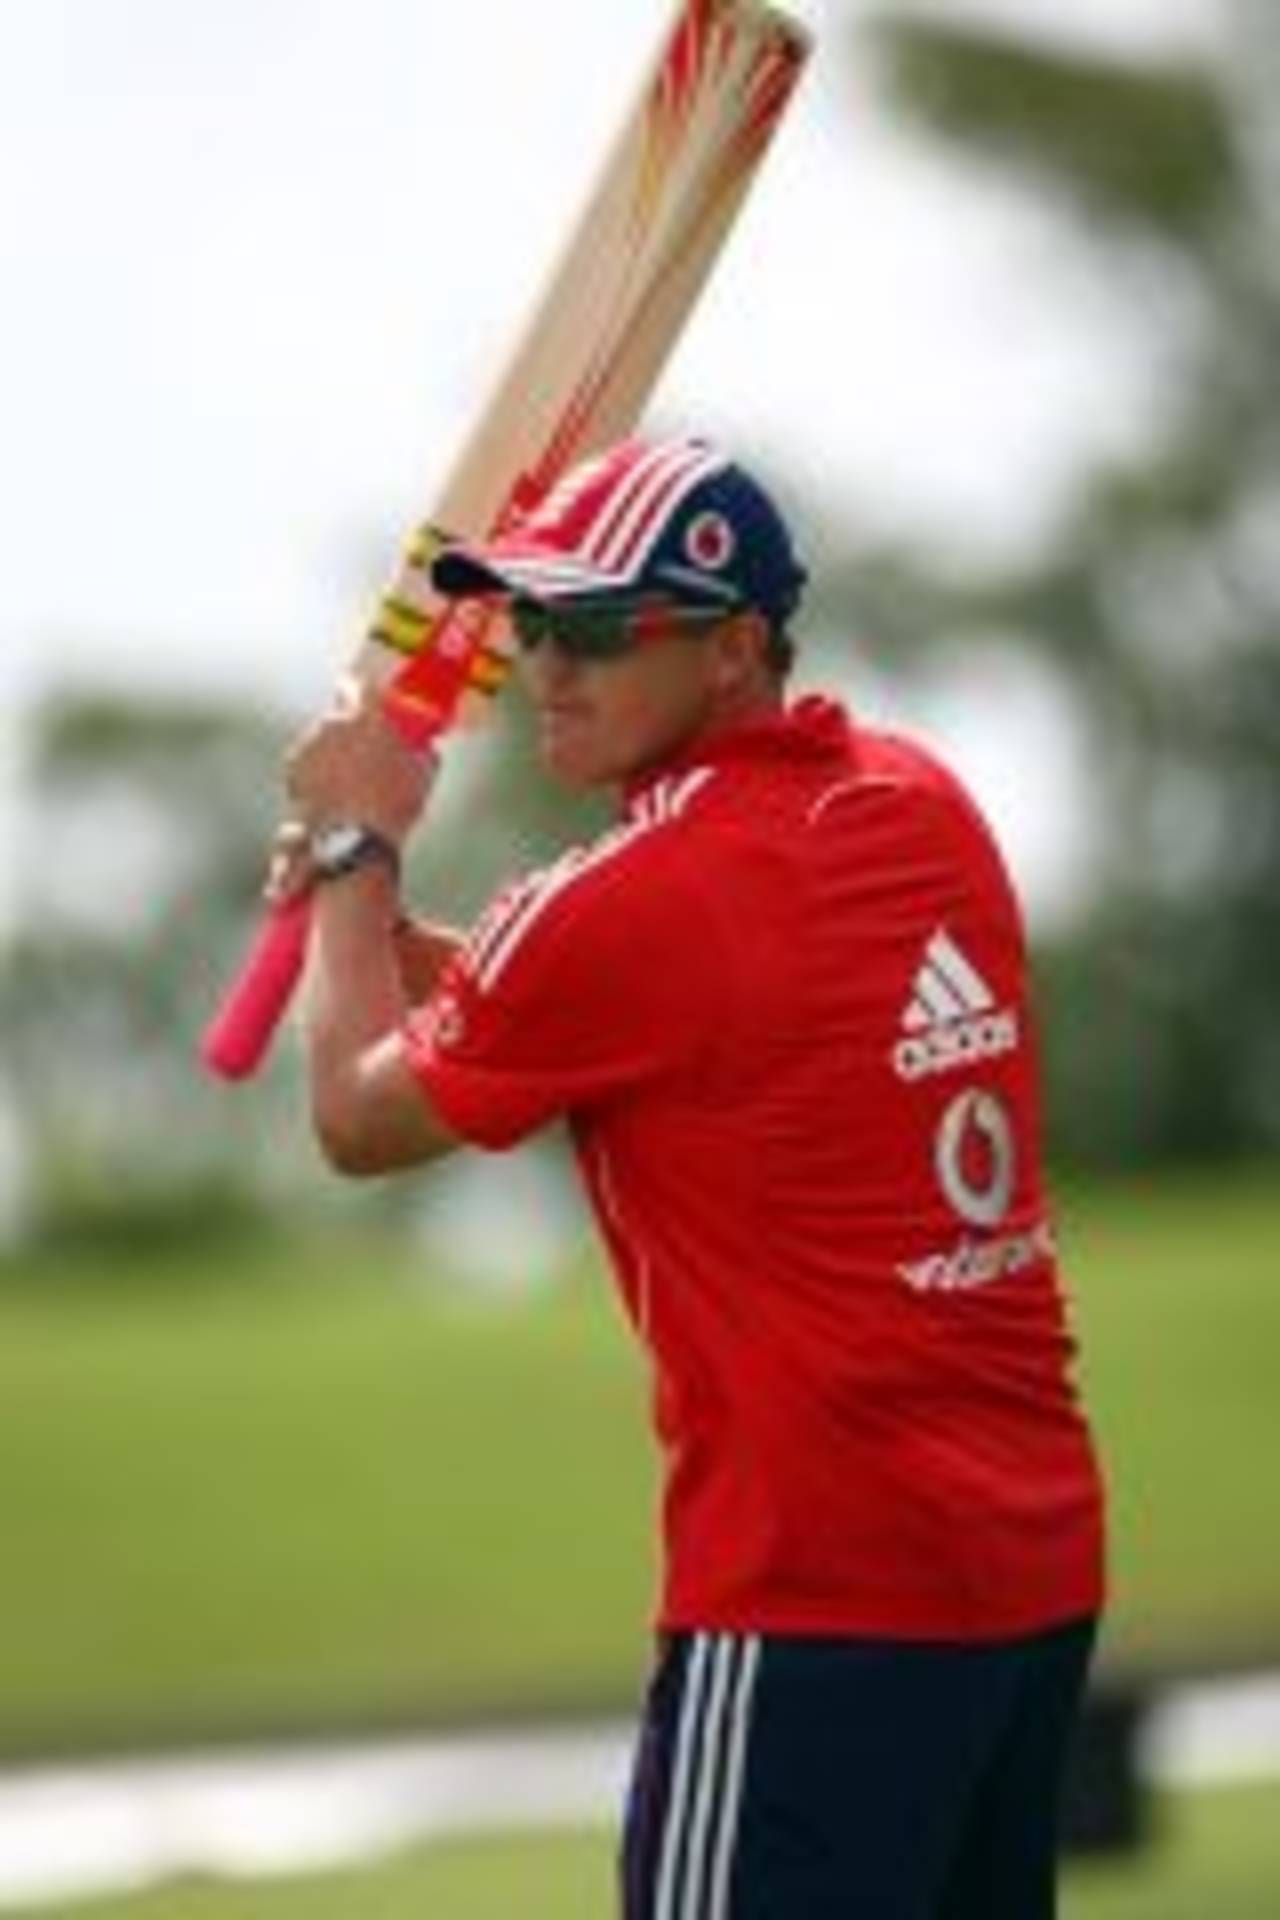 Andy Flower gives catching practice, St Kitts, January 24, 2009